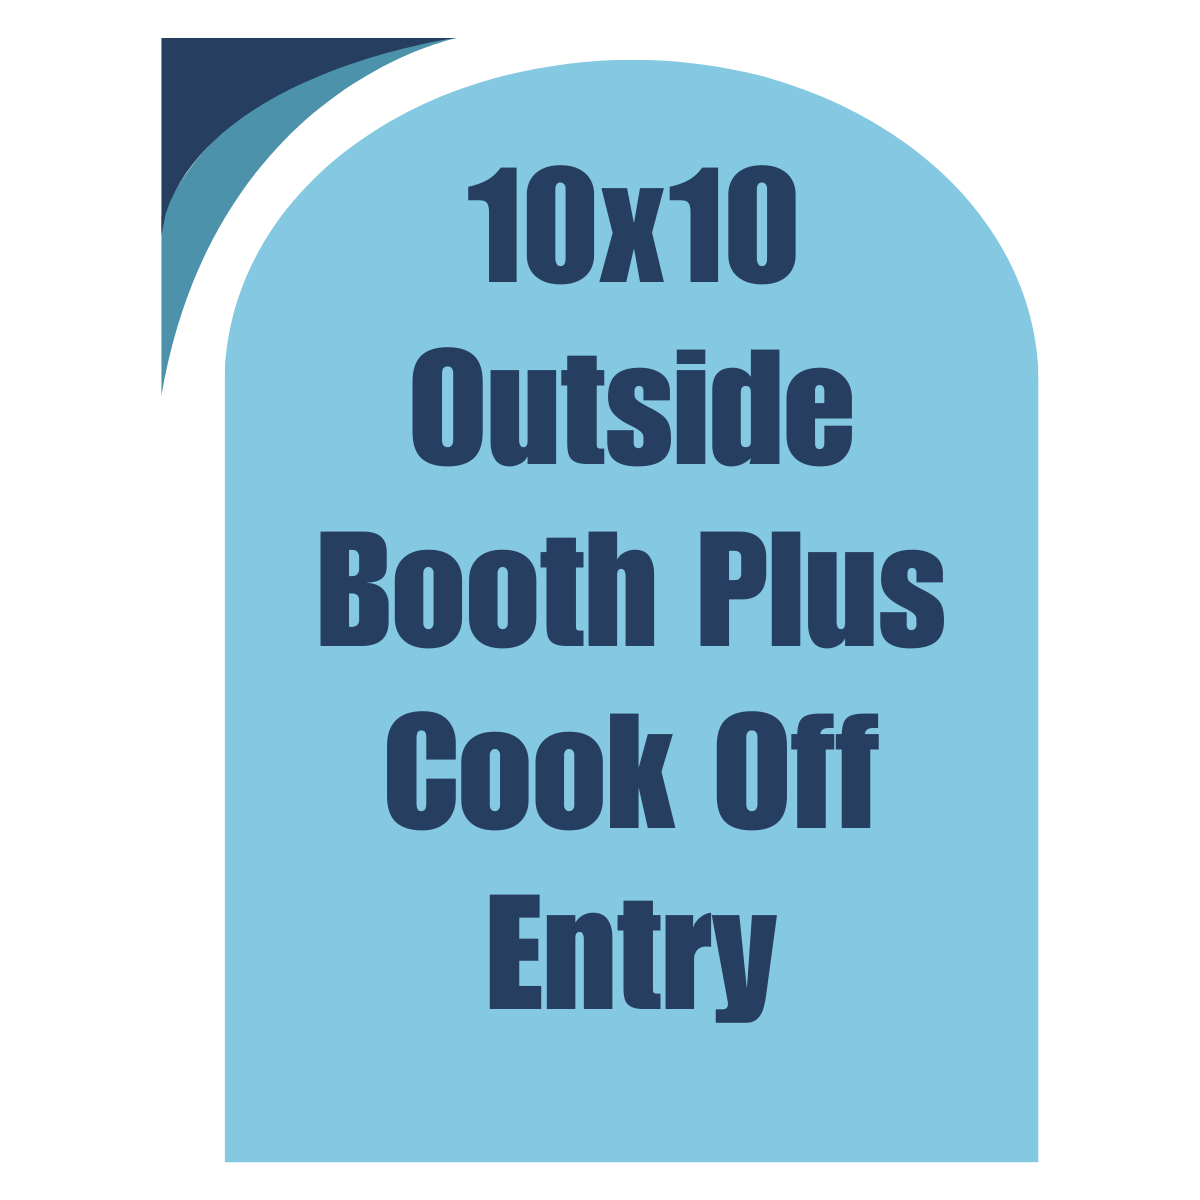 10x10 Outside Booth Plus Cook-Off Entry